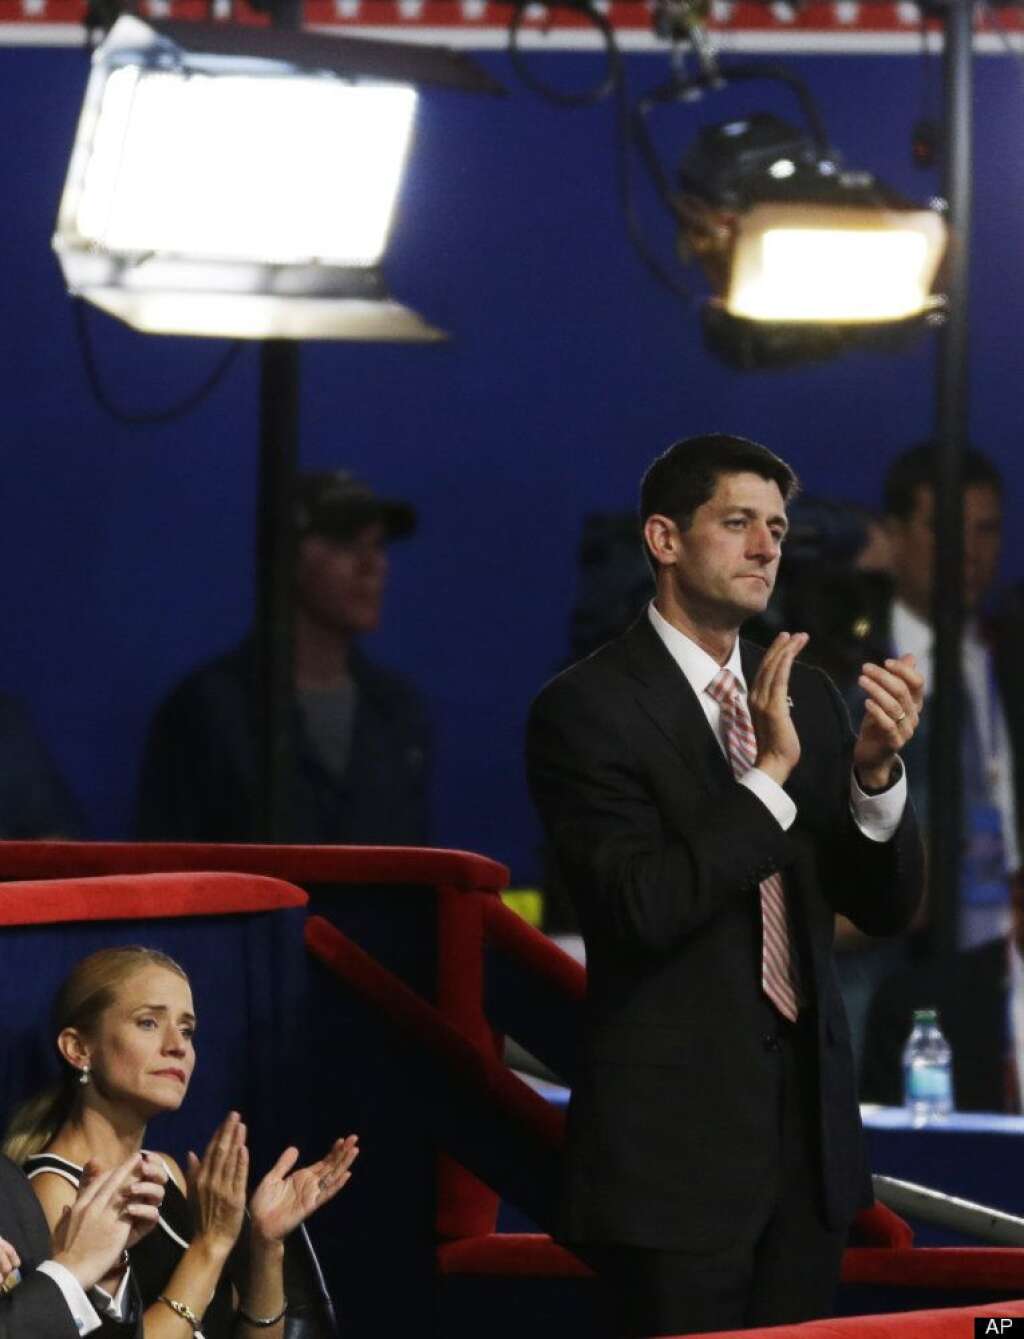 Republican vice presidential nominee, Rep. Paul Ryan, right, and his wife Janna applaud during Florida Senator Marco Rubio's speech during the Republican National Convention in Tampa, Fla., on Thursday, Aug. 30, 2012. (AP Photo/Lynne Sladky)